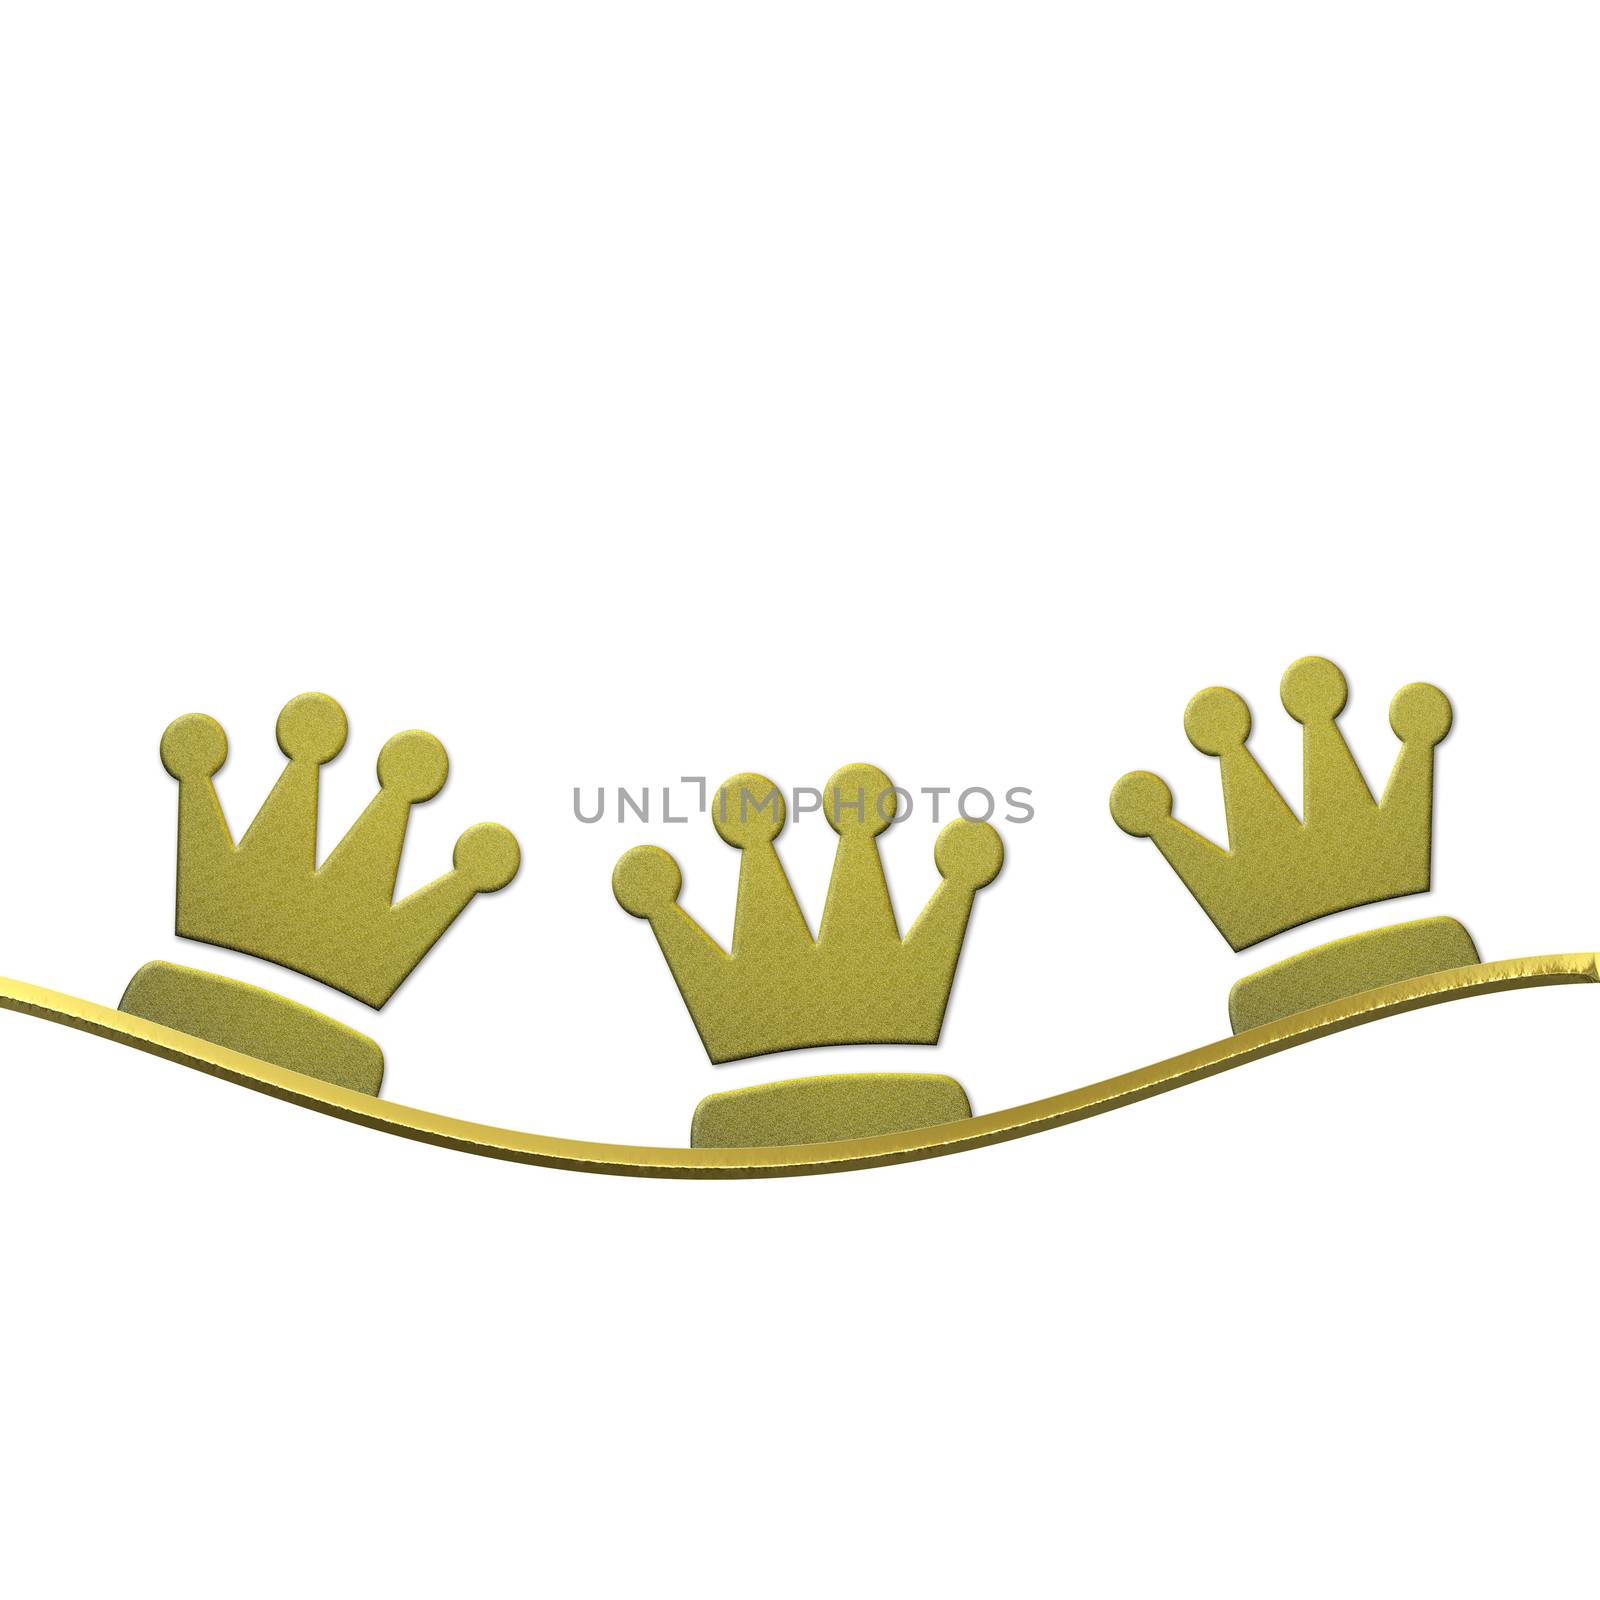 Christmas background, crowns of gold three wise men isolated on white background with space for text